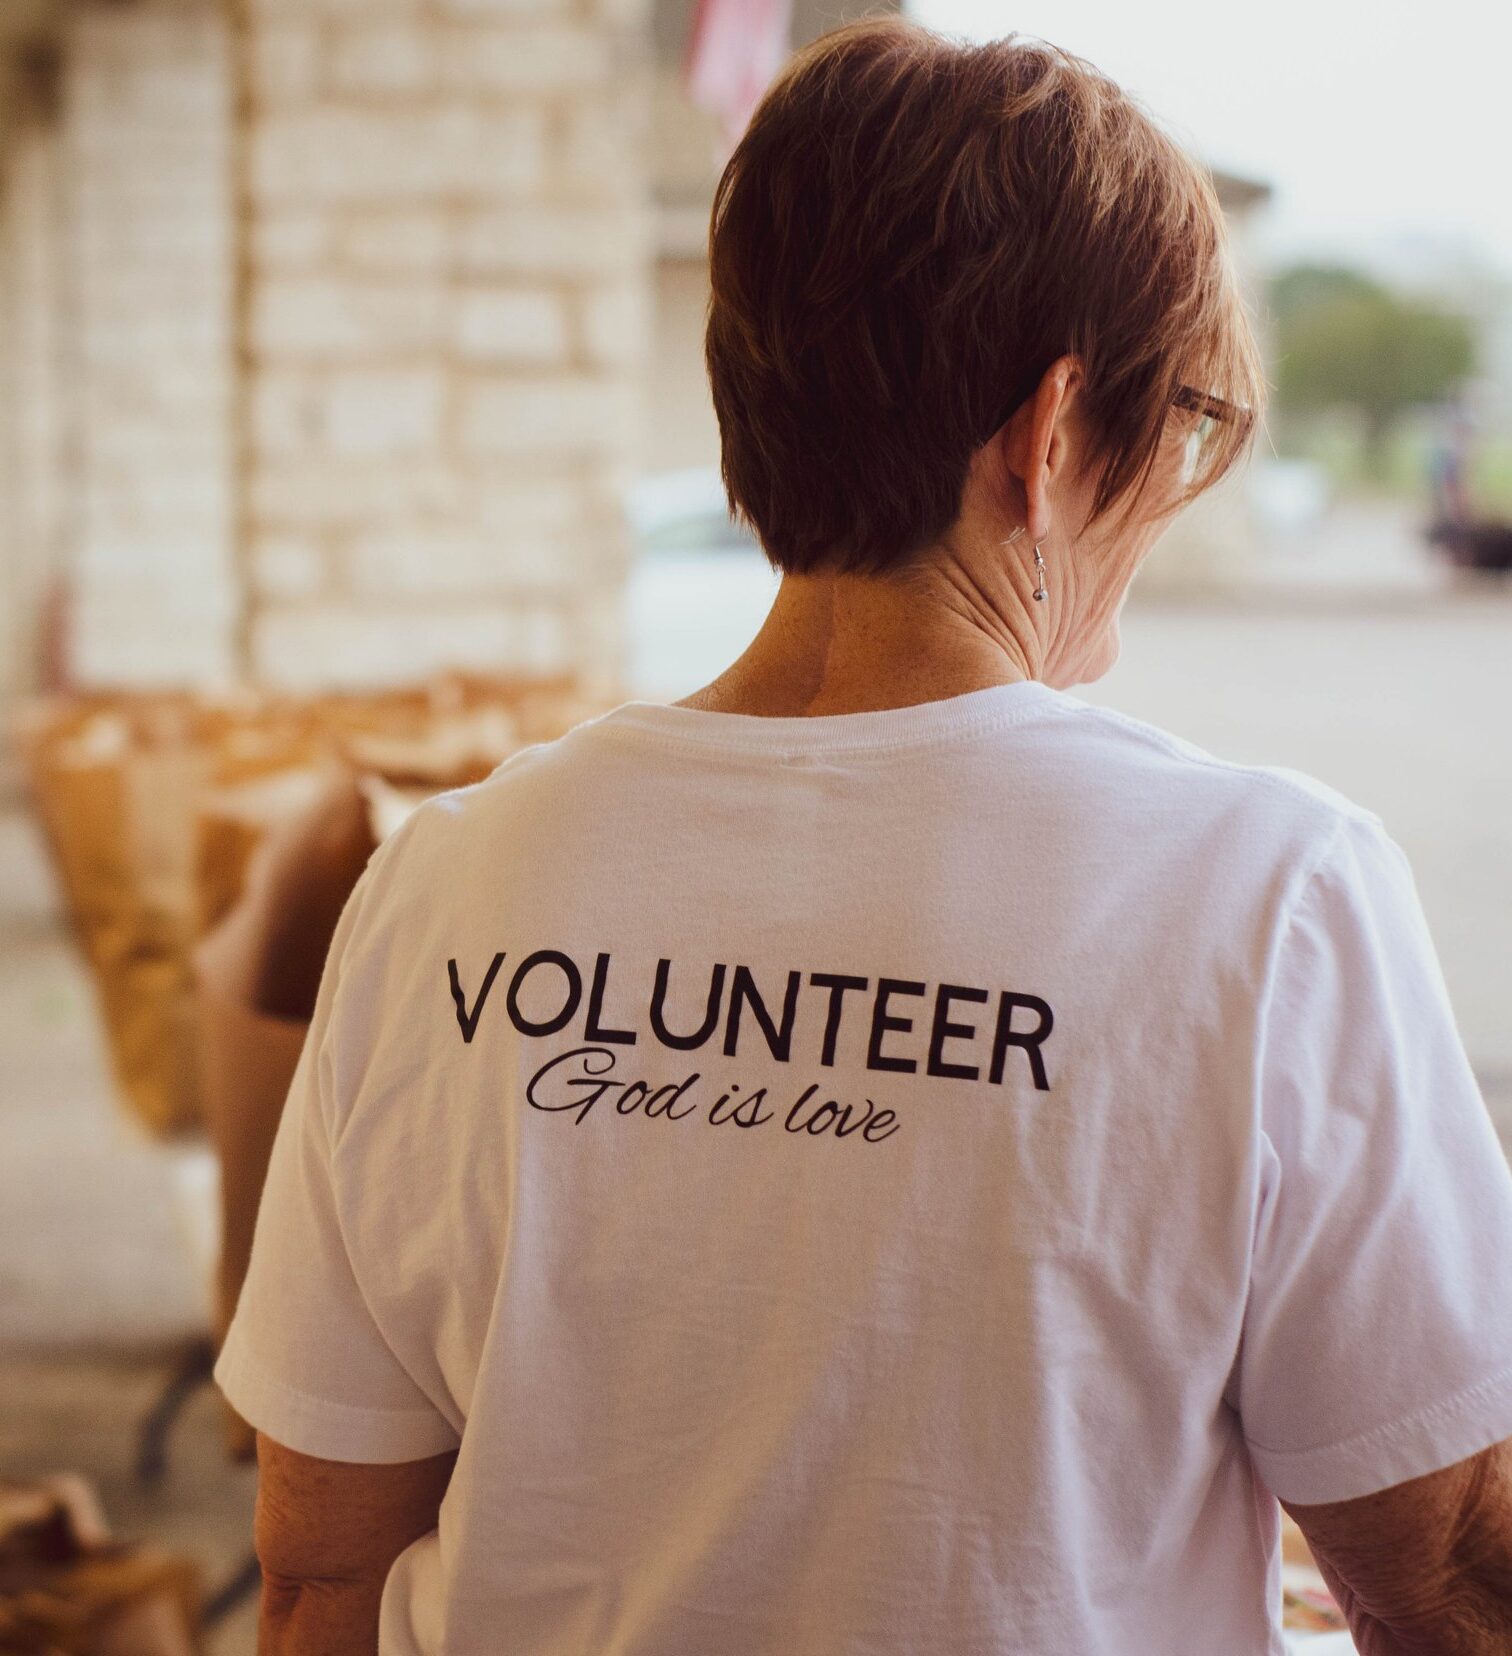 A woman wearing a white tee shirt which says volunteer.